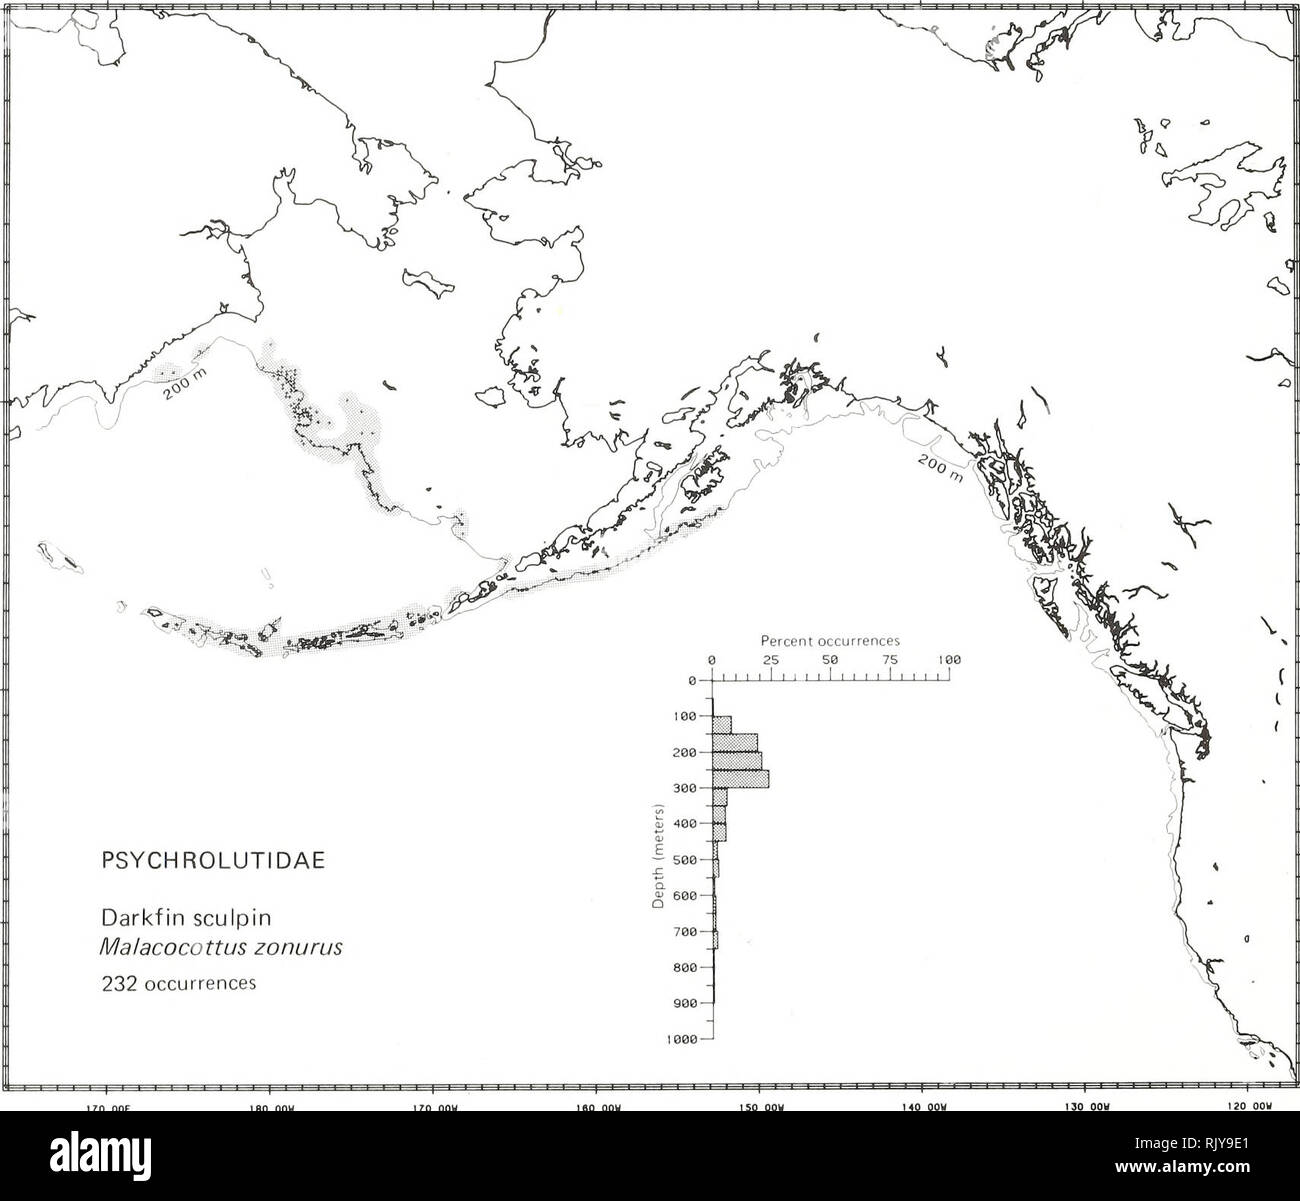 . Atlas and zoogeography of common fishes in the Bering Sea and Northeastern Pacific / M. James Allen, Gary B. Smith. Fishes Bering Sea Geographical distribution.. DARKFIN SCULPIN, Malacocottus zonurus Bean 1890 Psychrolutidae: Soft Sculpins Literature Reported from the Sea of Okhotsk and the Bering Sea to Washington (Shmidt 1950; Howe 1981), at depths of 100 to 1980 m (Fedorov 1973a). Survey data Found from off Glubokaya Bay (on the Korak Coast of the western Bering Sea) north to southeast of Cape Navarin, southeast along the outer shelf and slope of the eastern Bering Sea to Akutan Island, w Stock Photo